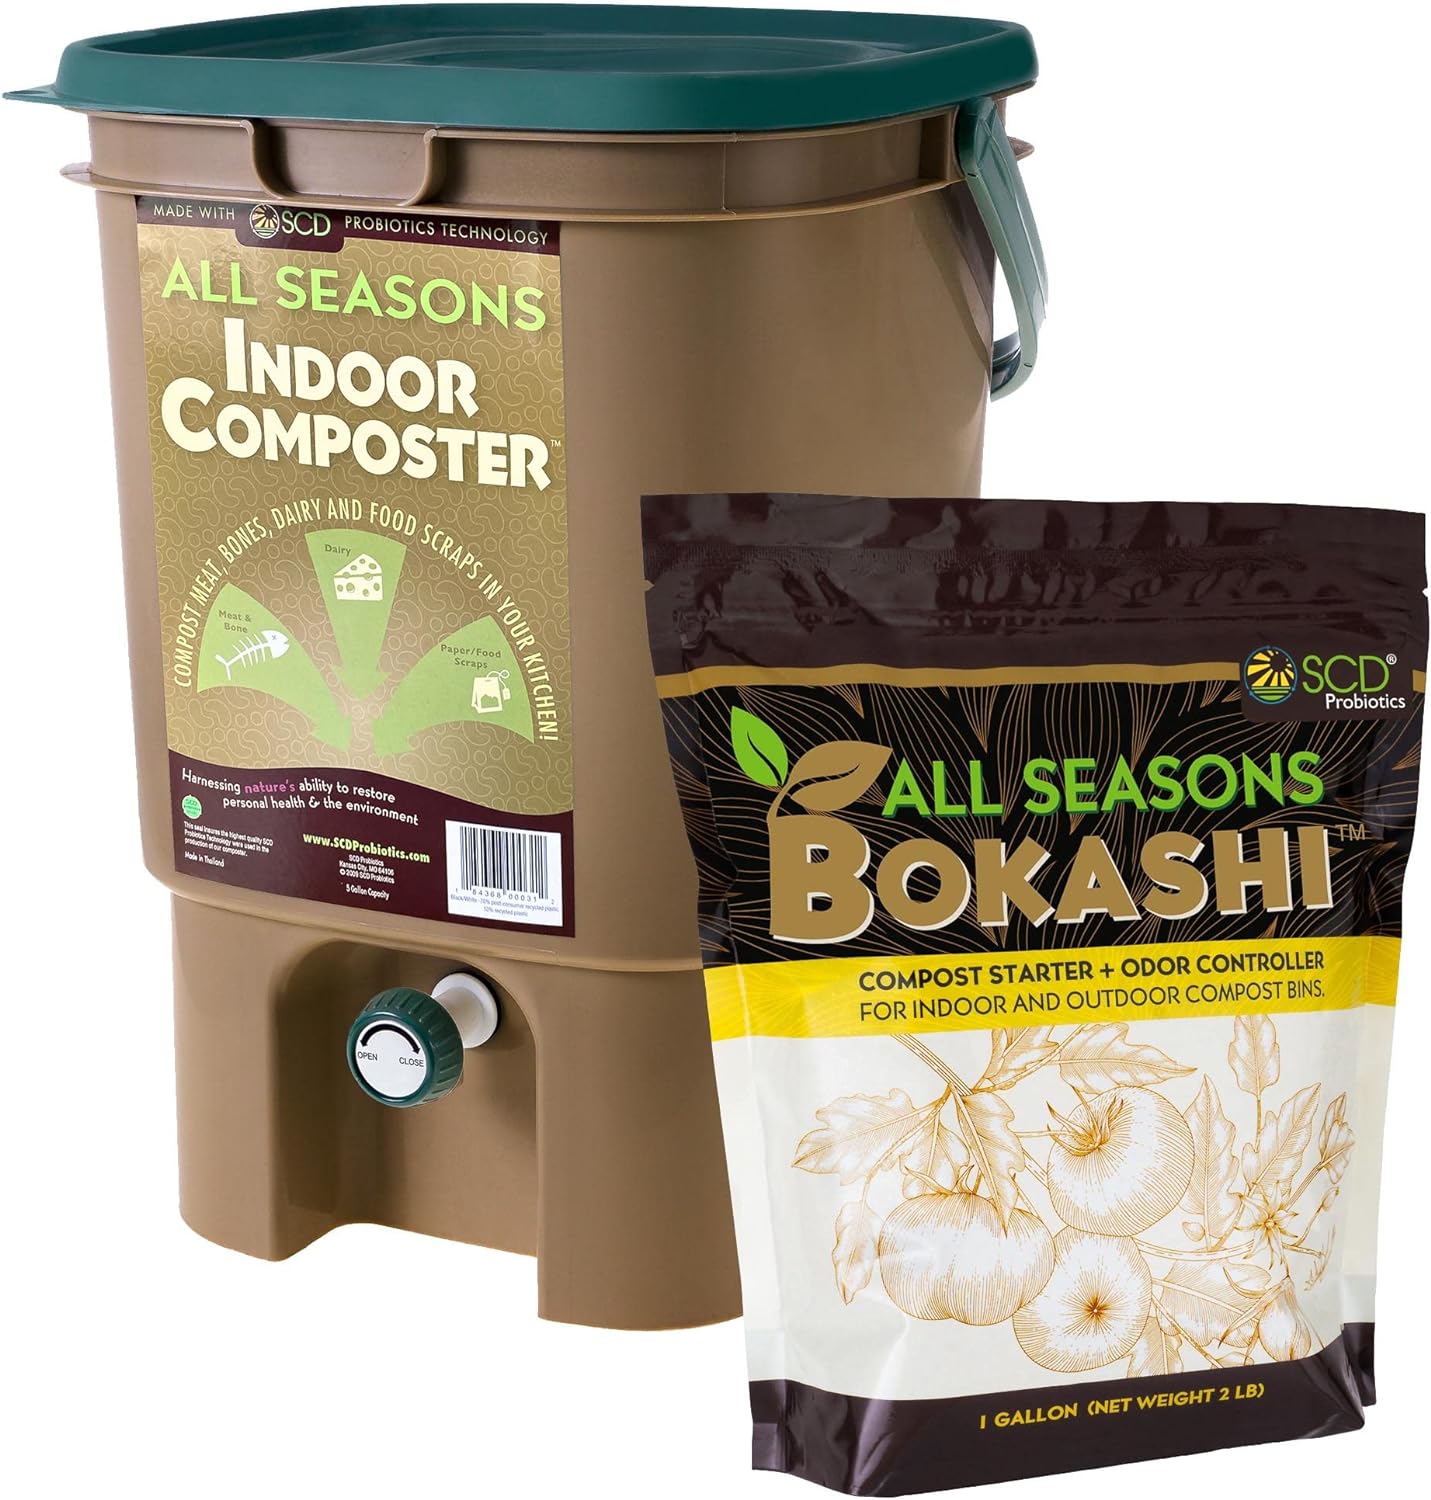 All Seasons Indoor Composter Kit Review